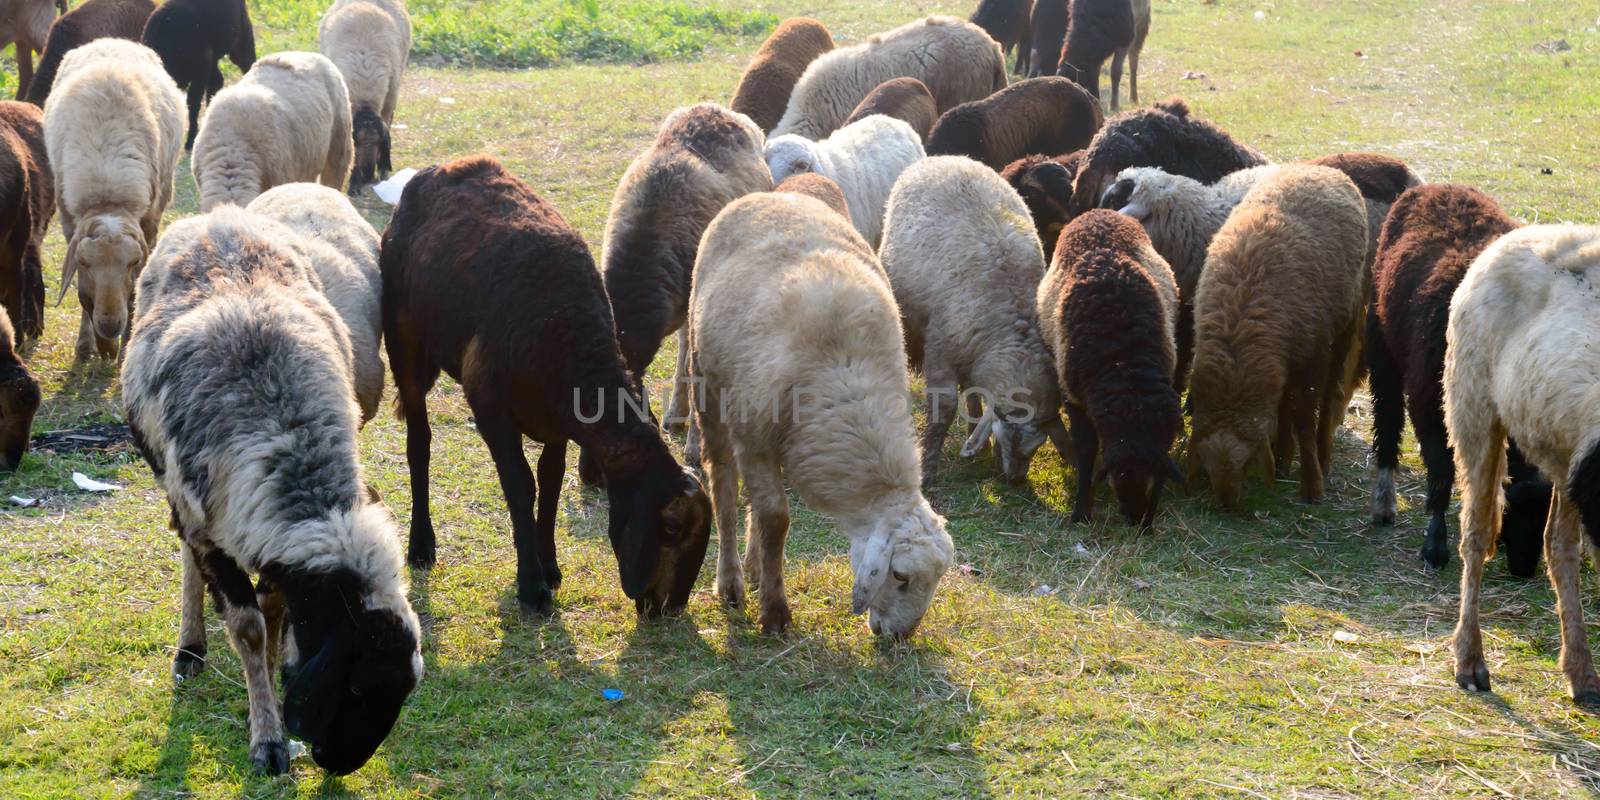 Flock of Domestic Sheep, Ewe, Lamb, Ram (Ovis aries species genus) grazing in a sheep farm in Summer Sunset. Typically livestock ruminant mammals. Artiodactyla family. Dairy cattle Background theme. by sudiptabhowmick